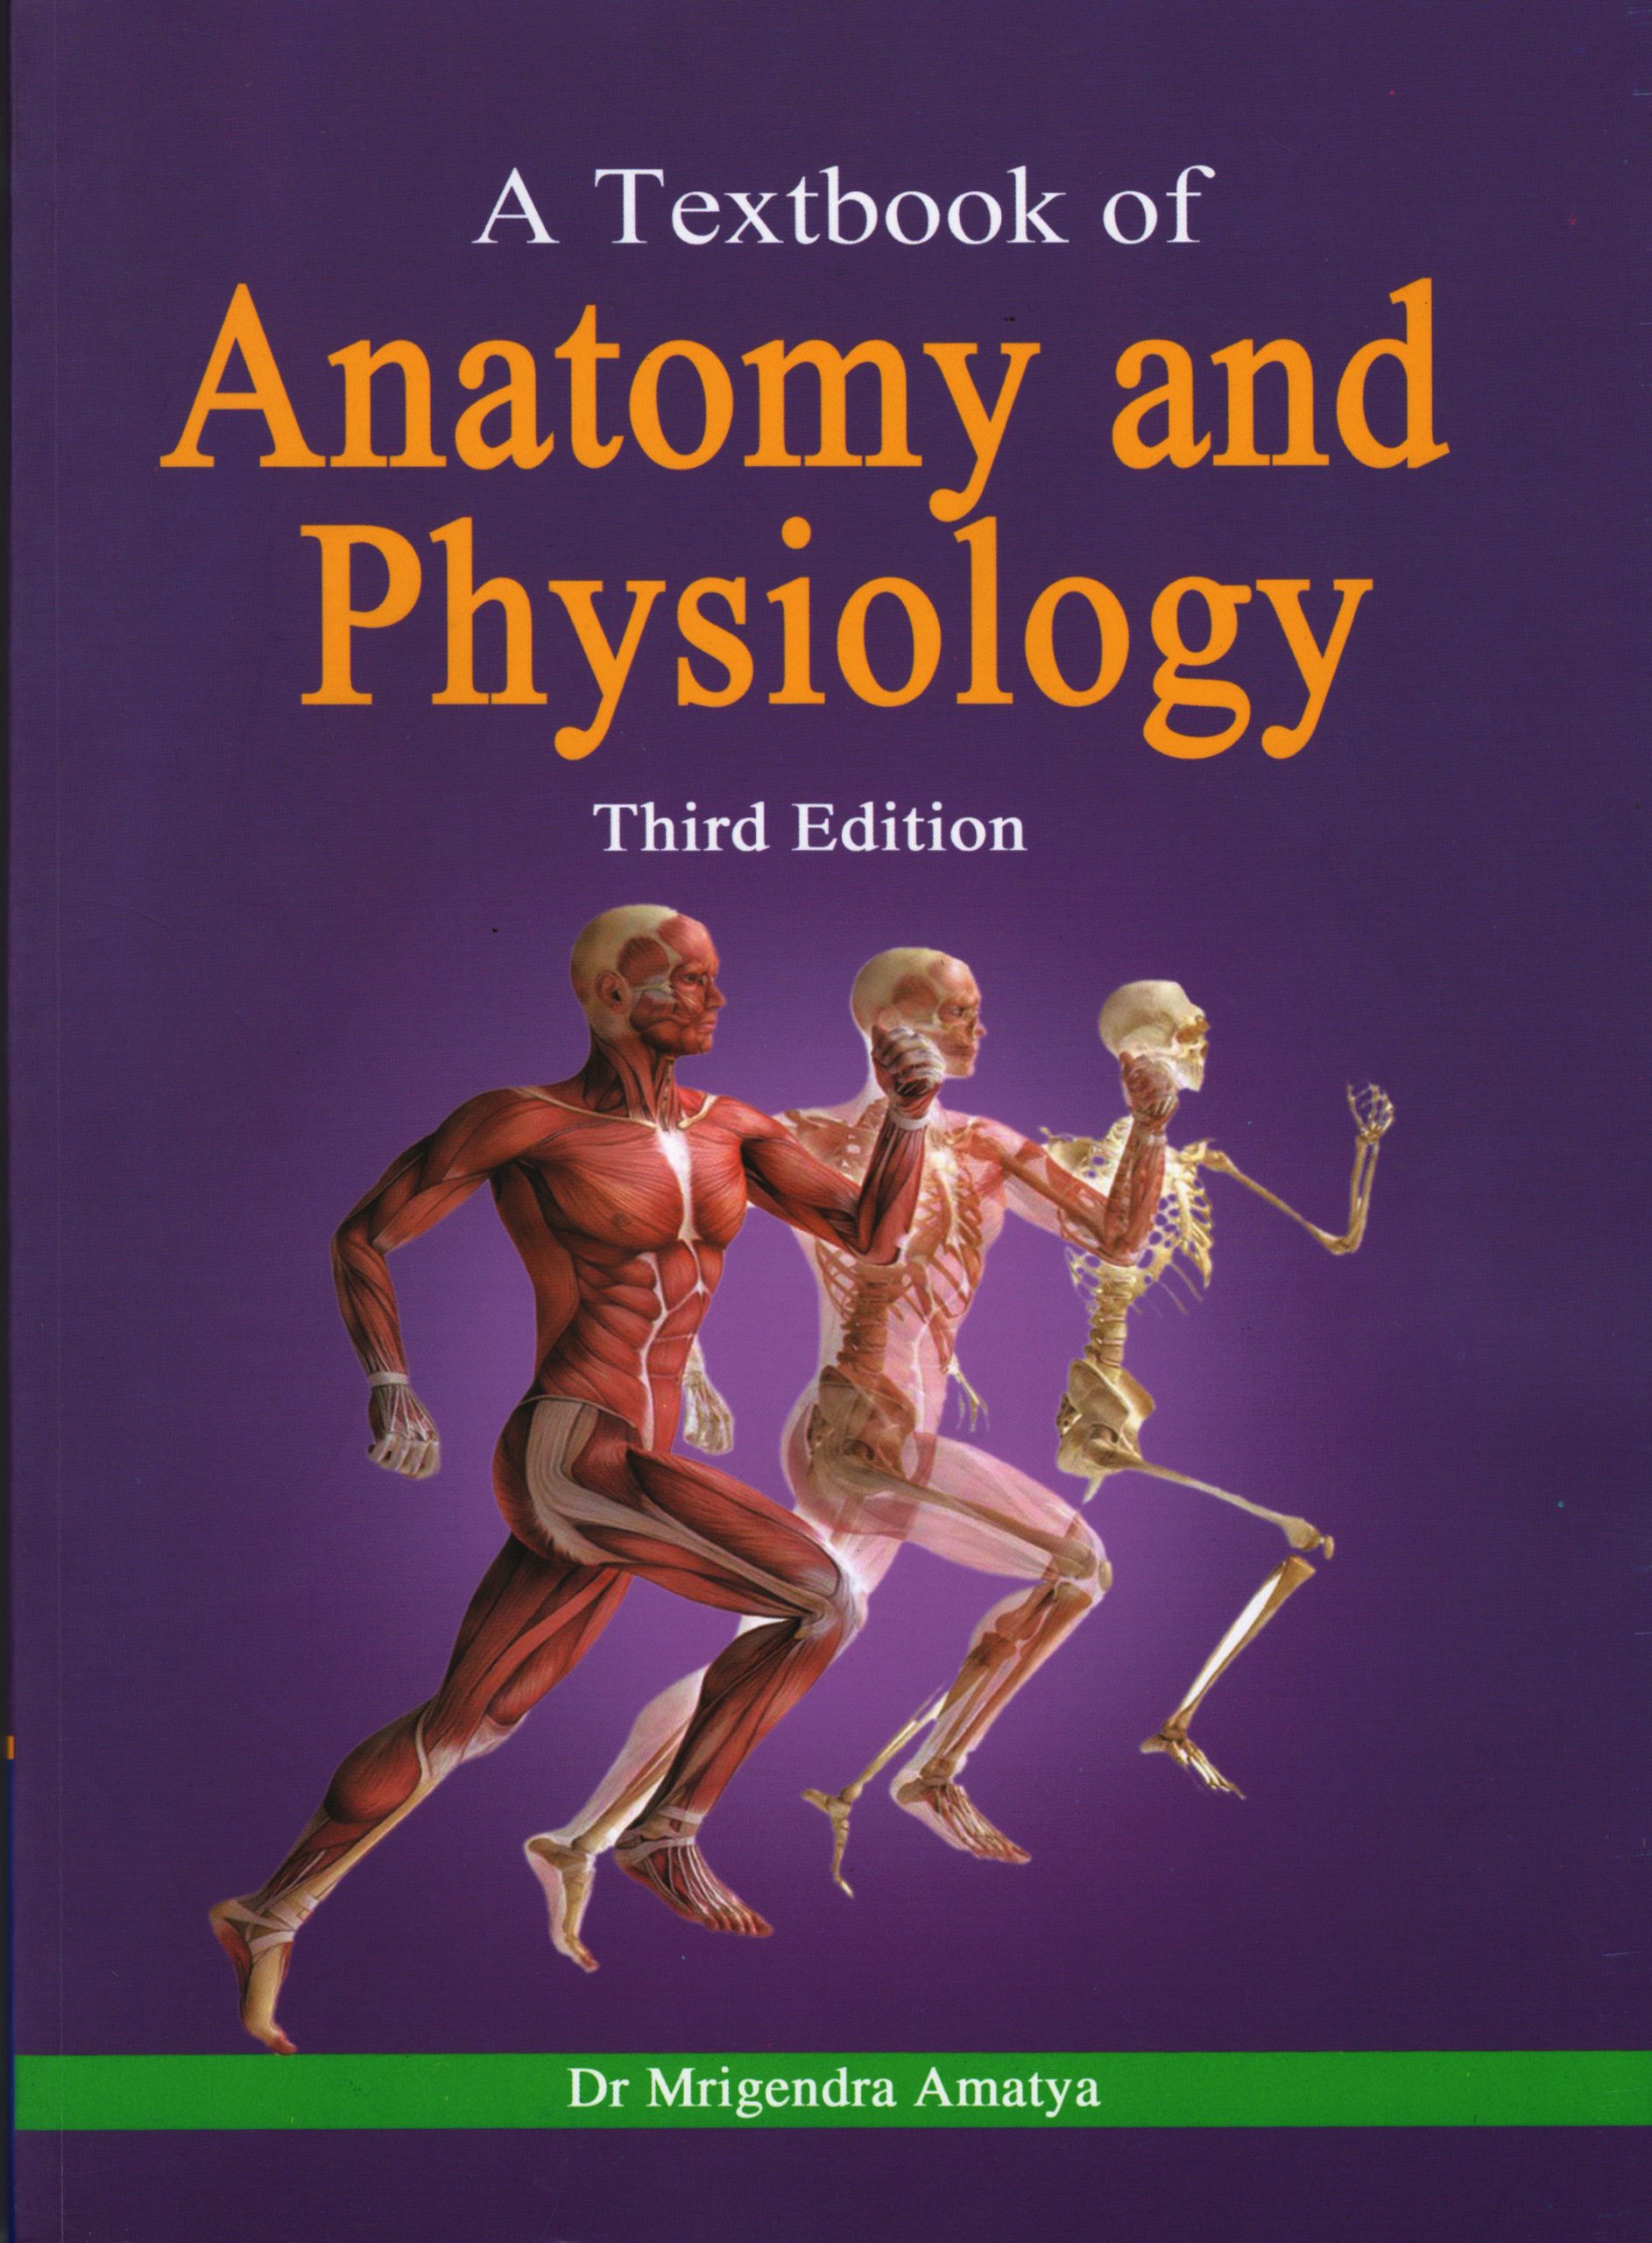 A Textbook of Anatomy and Physiology